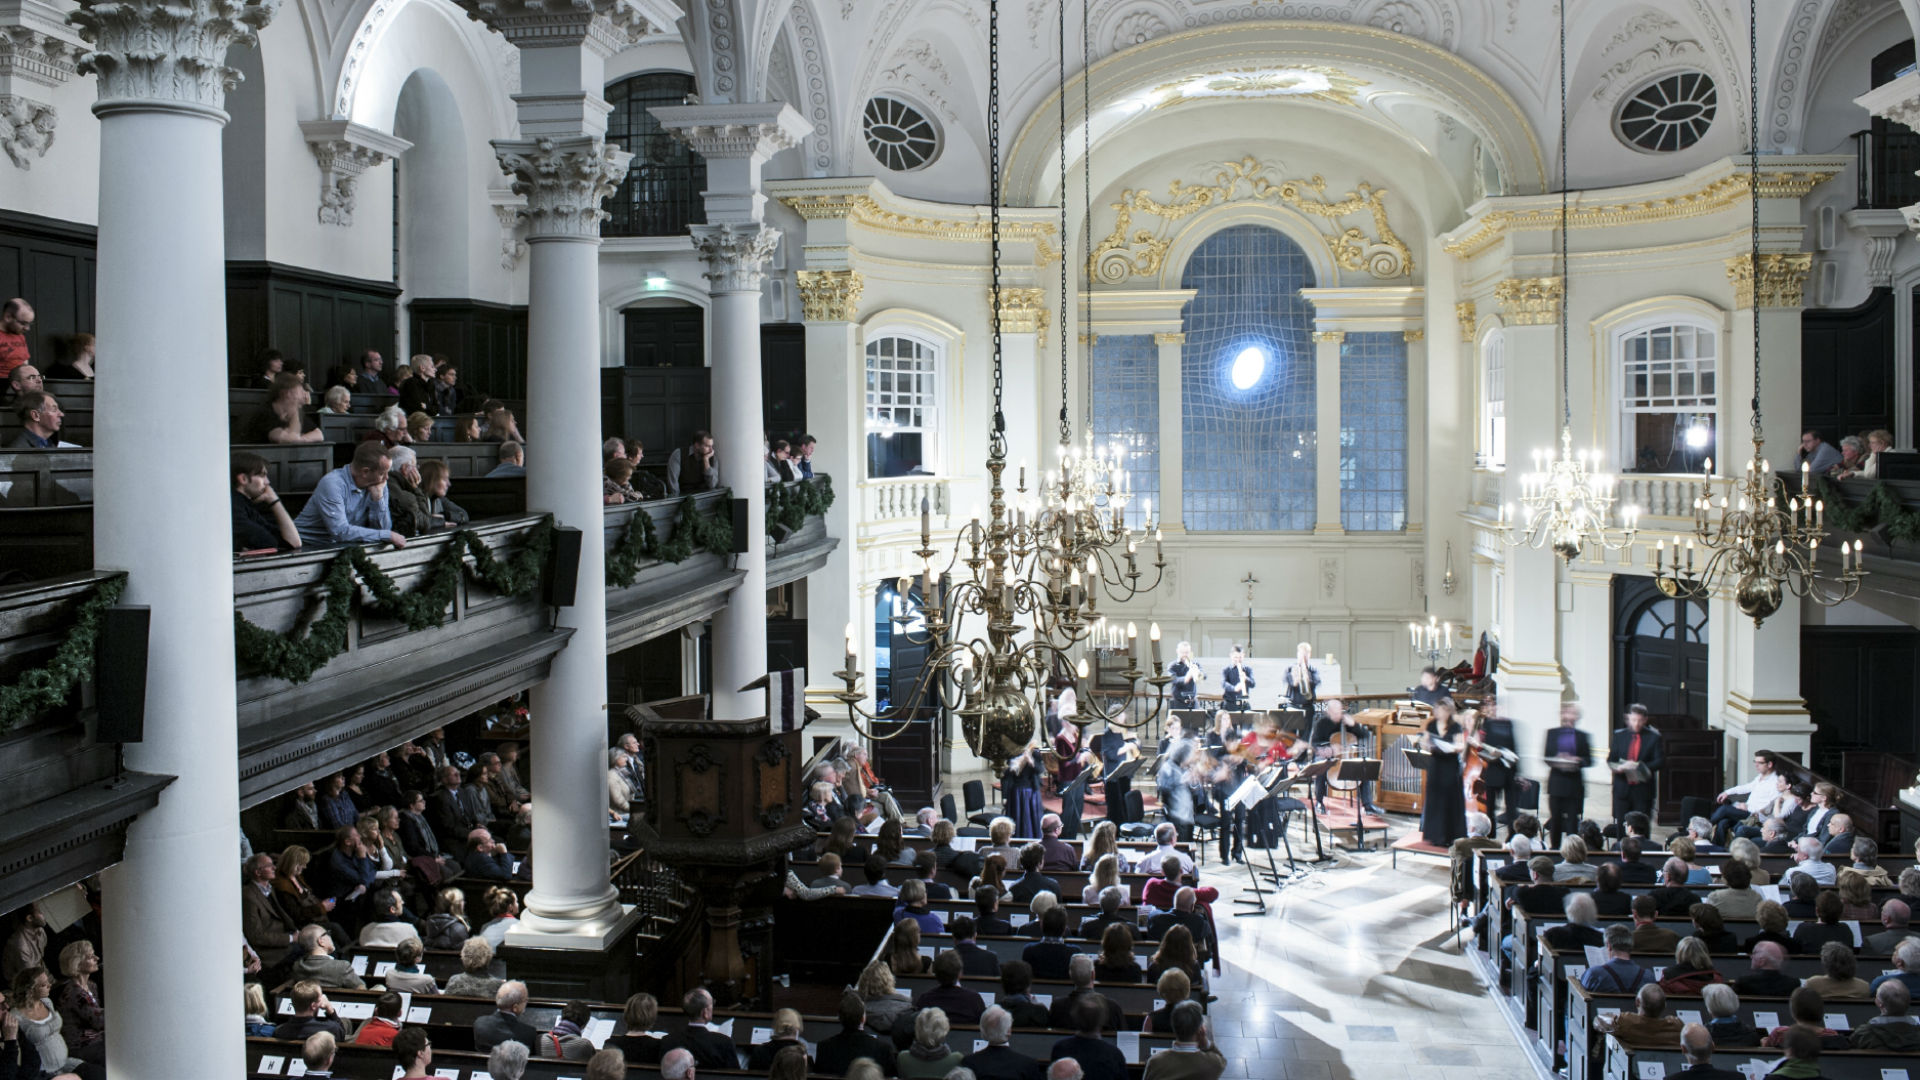 A photo of a crowd in the St Martin-in-the-Fields Church in the evening, attending a ceremony. 